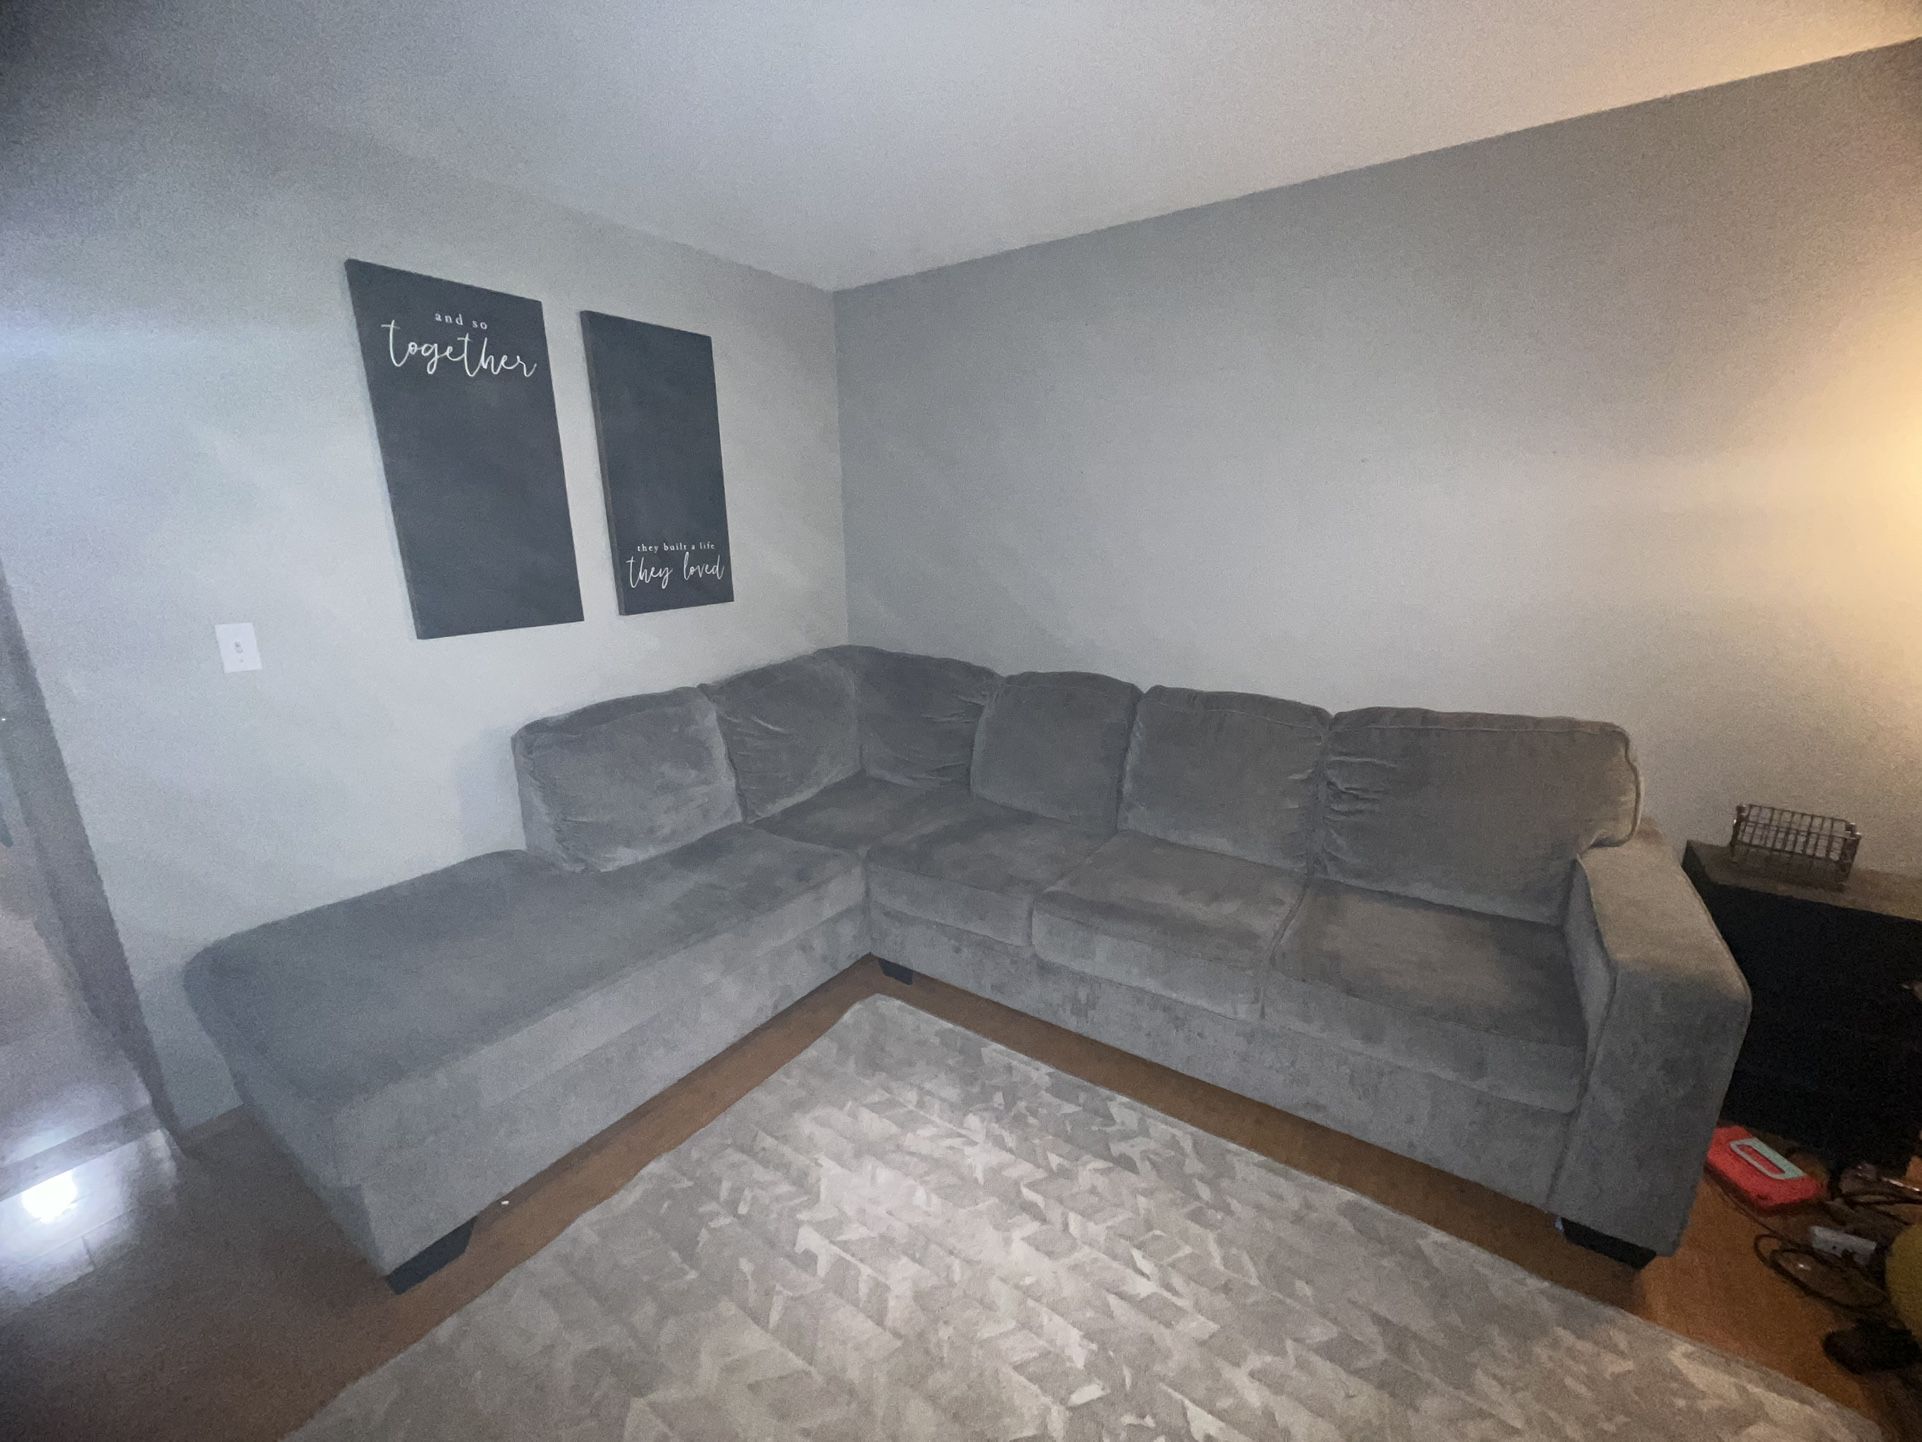 Pullout bed sectional Couch